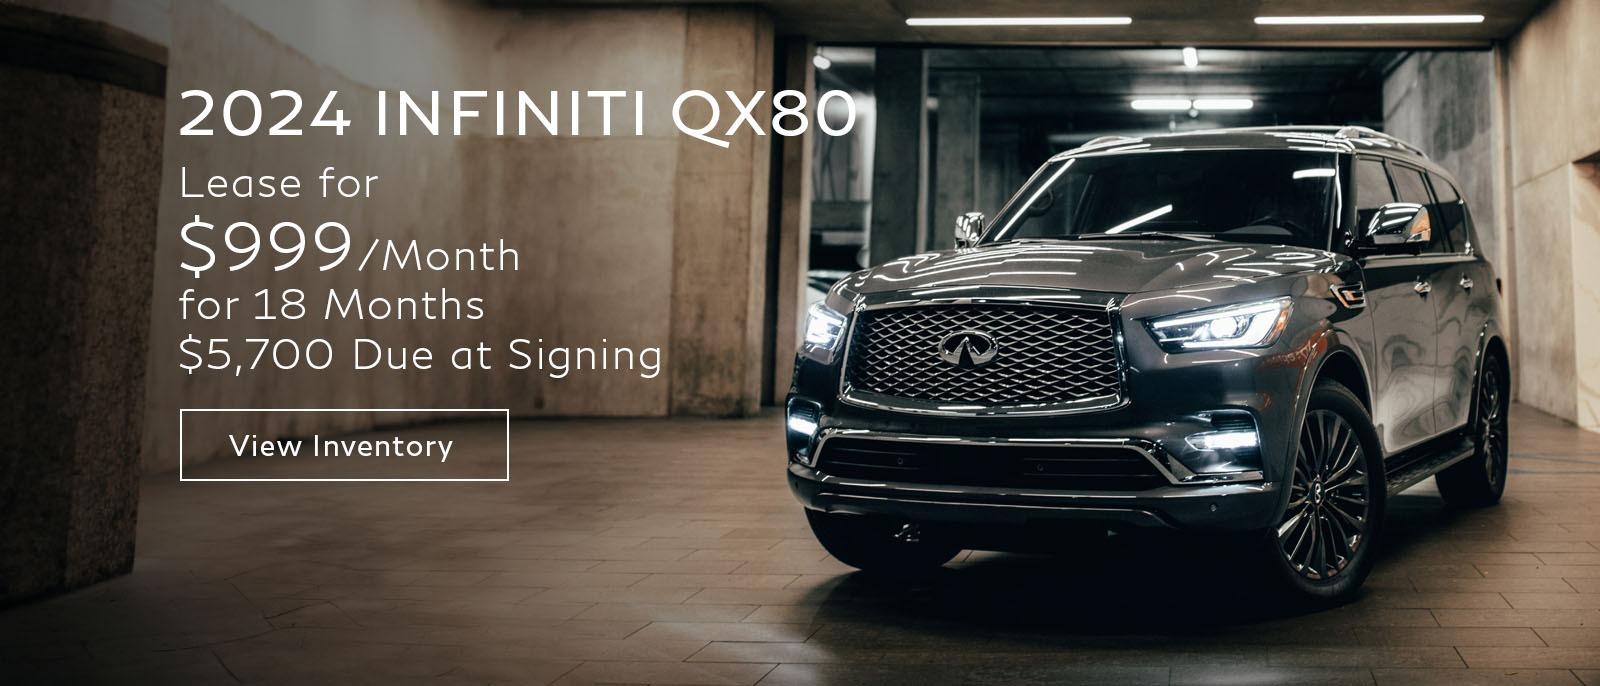 Lease the 2024 INFINITI QX80 for $999/Month